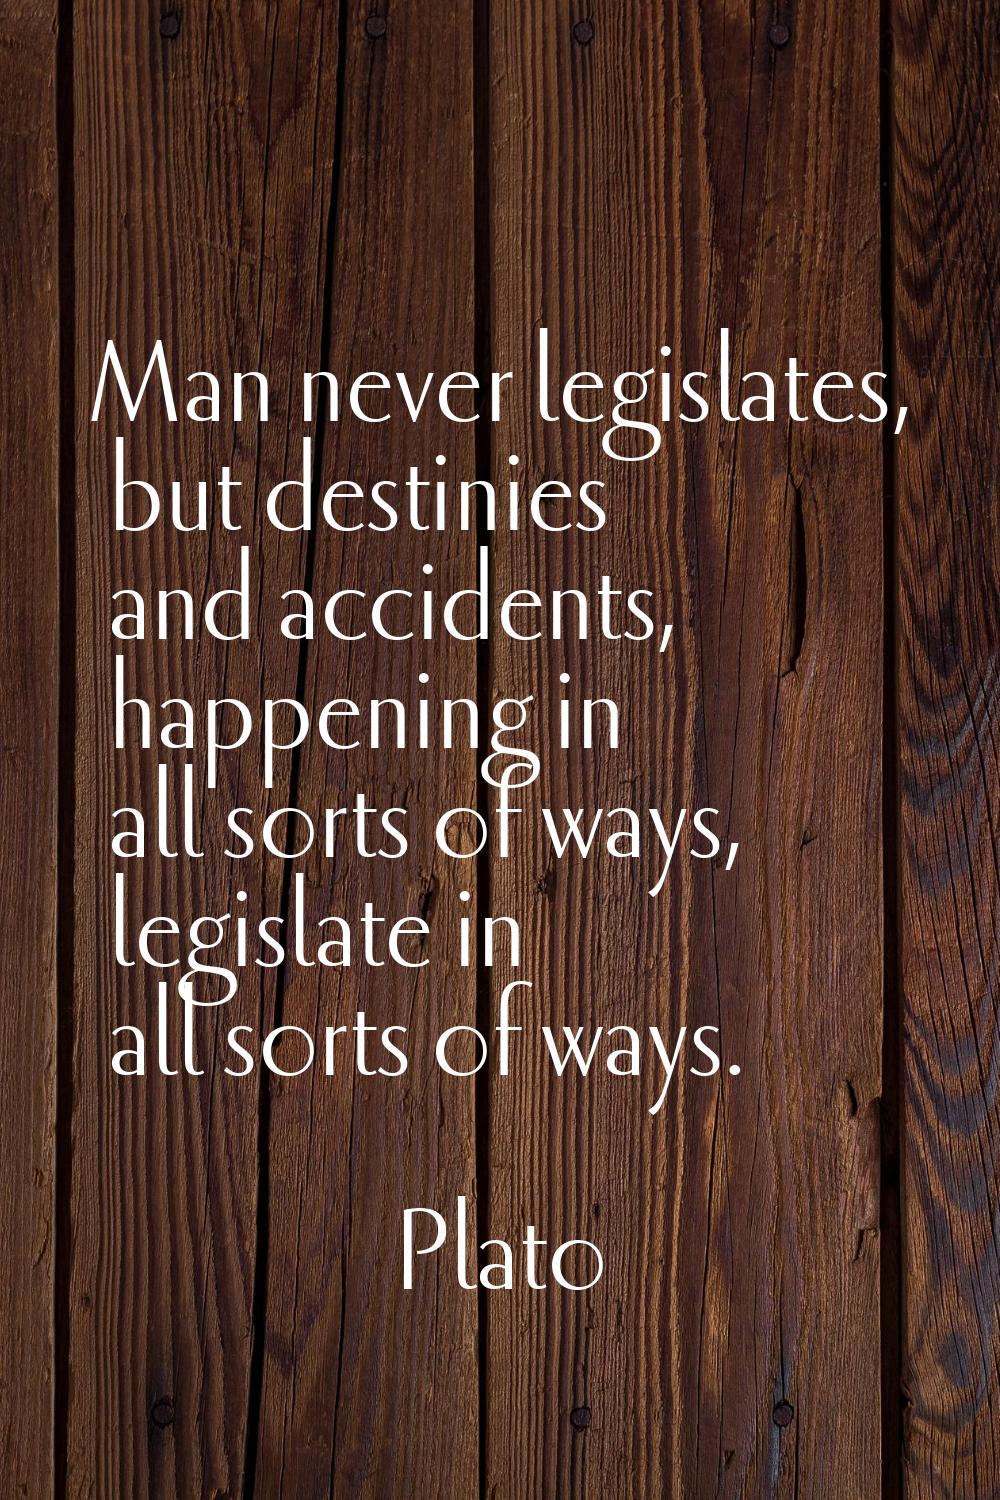 Man never legislates, but destinies and accidents, happening in all sorts of ways, legislate in all